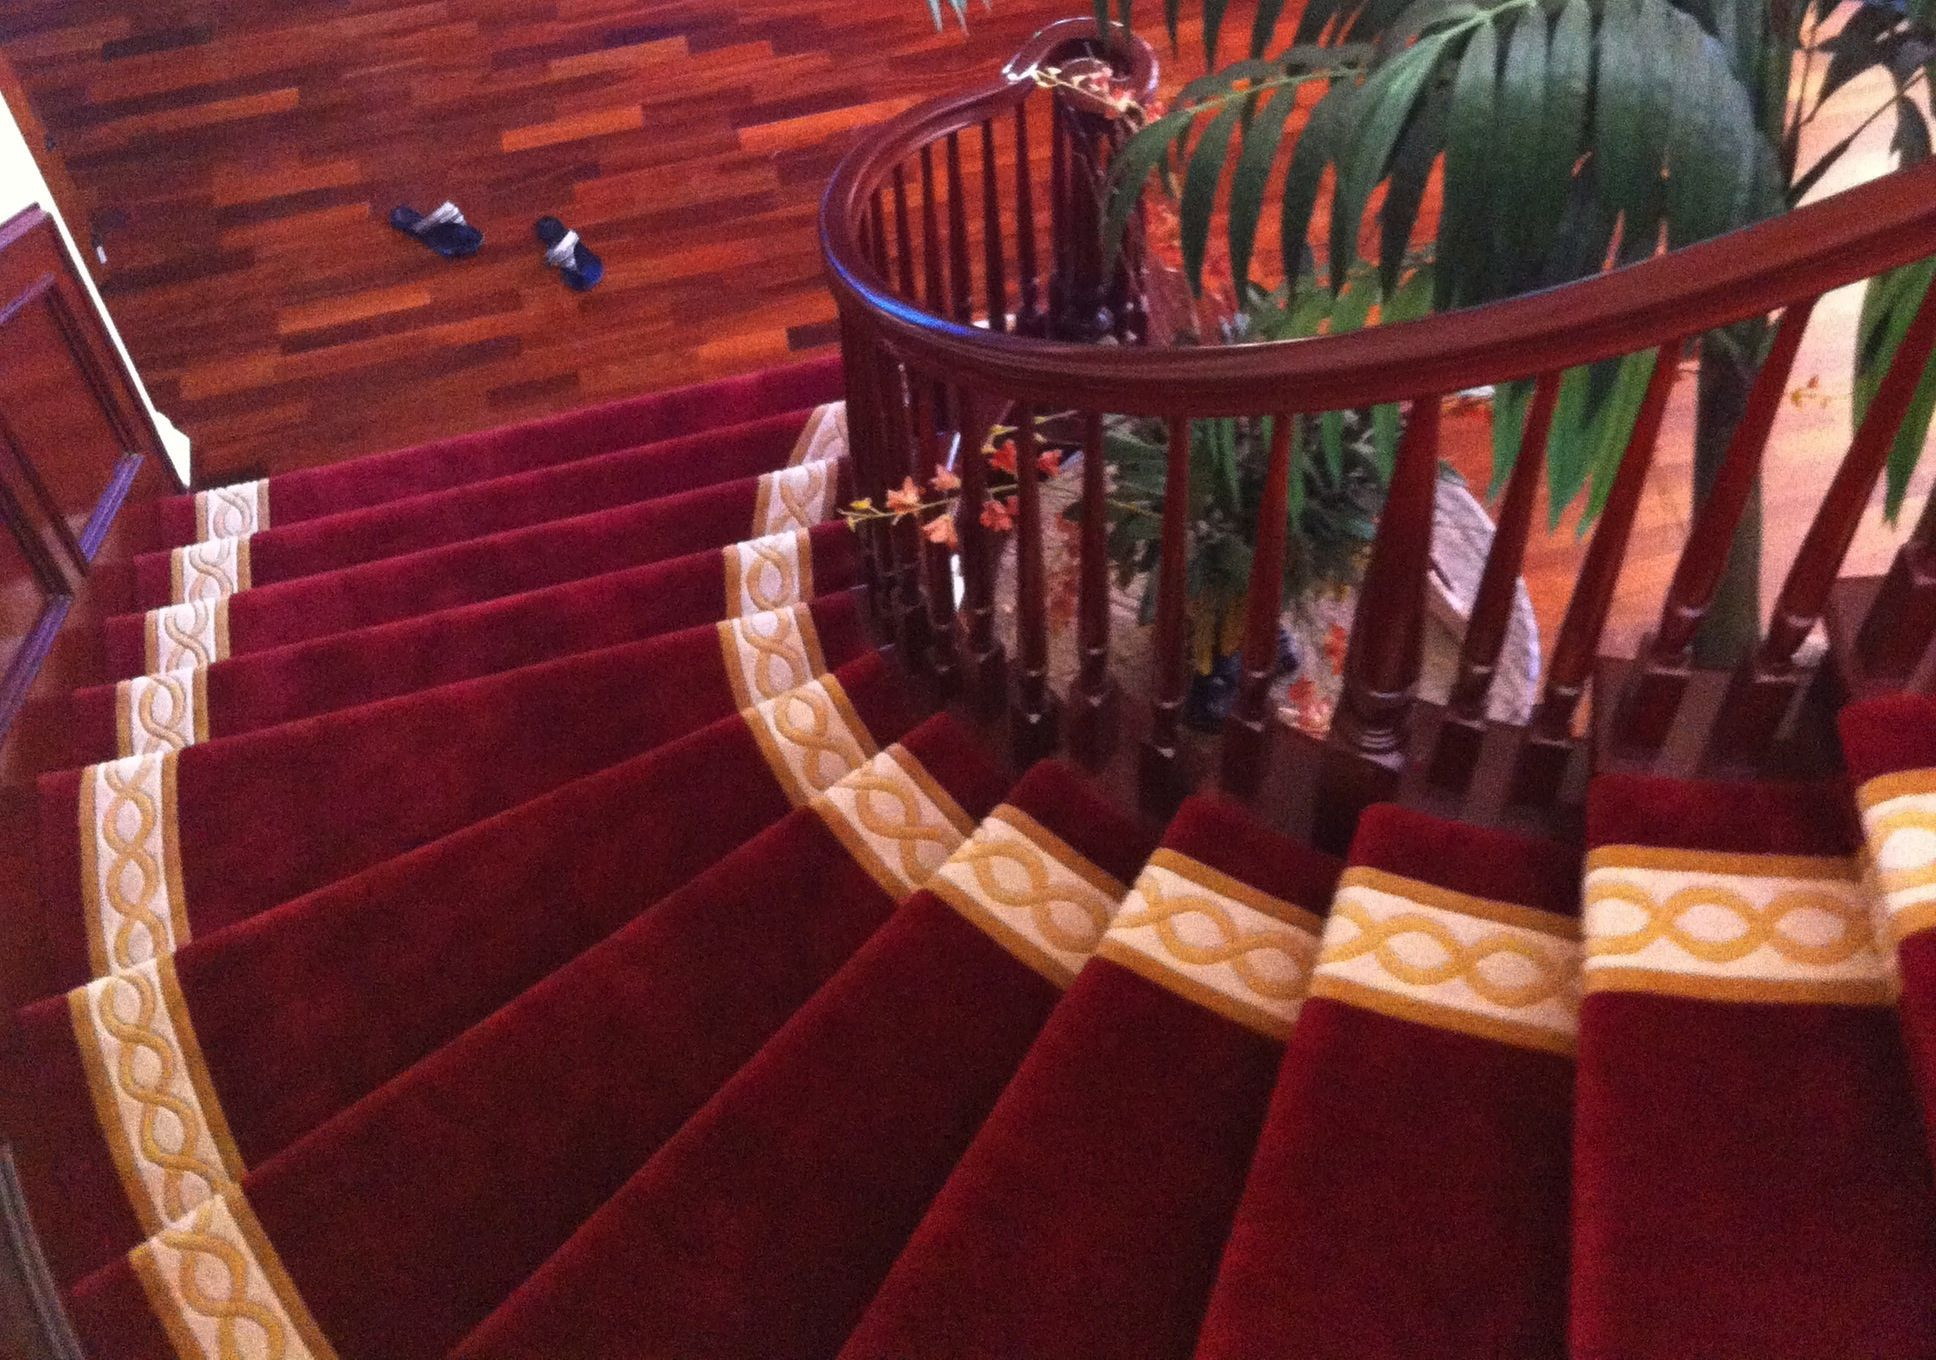 Hardwood Floors Carpet On Stairs Of Designer Cherry Stained Wooden Banister Rails and Handle Stairs with Inside Designer Cherry Stained Wooden Banister Rails and Handle Stairs with Glamorous Red Carpet for Stairs as Well as Laminate Wood Flooring Installation